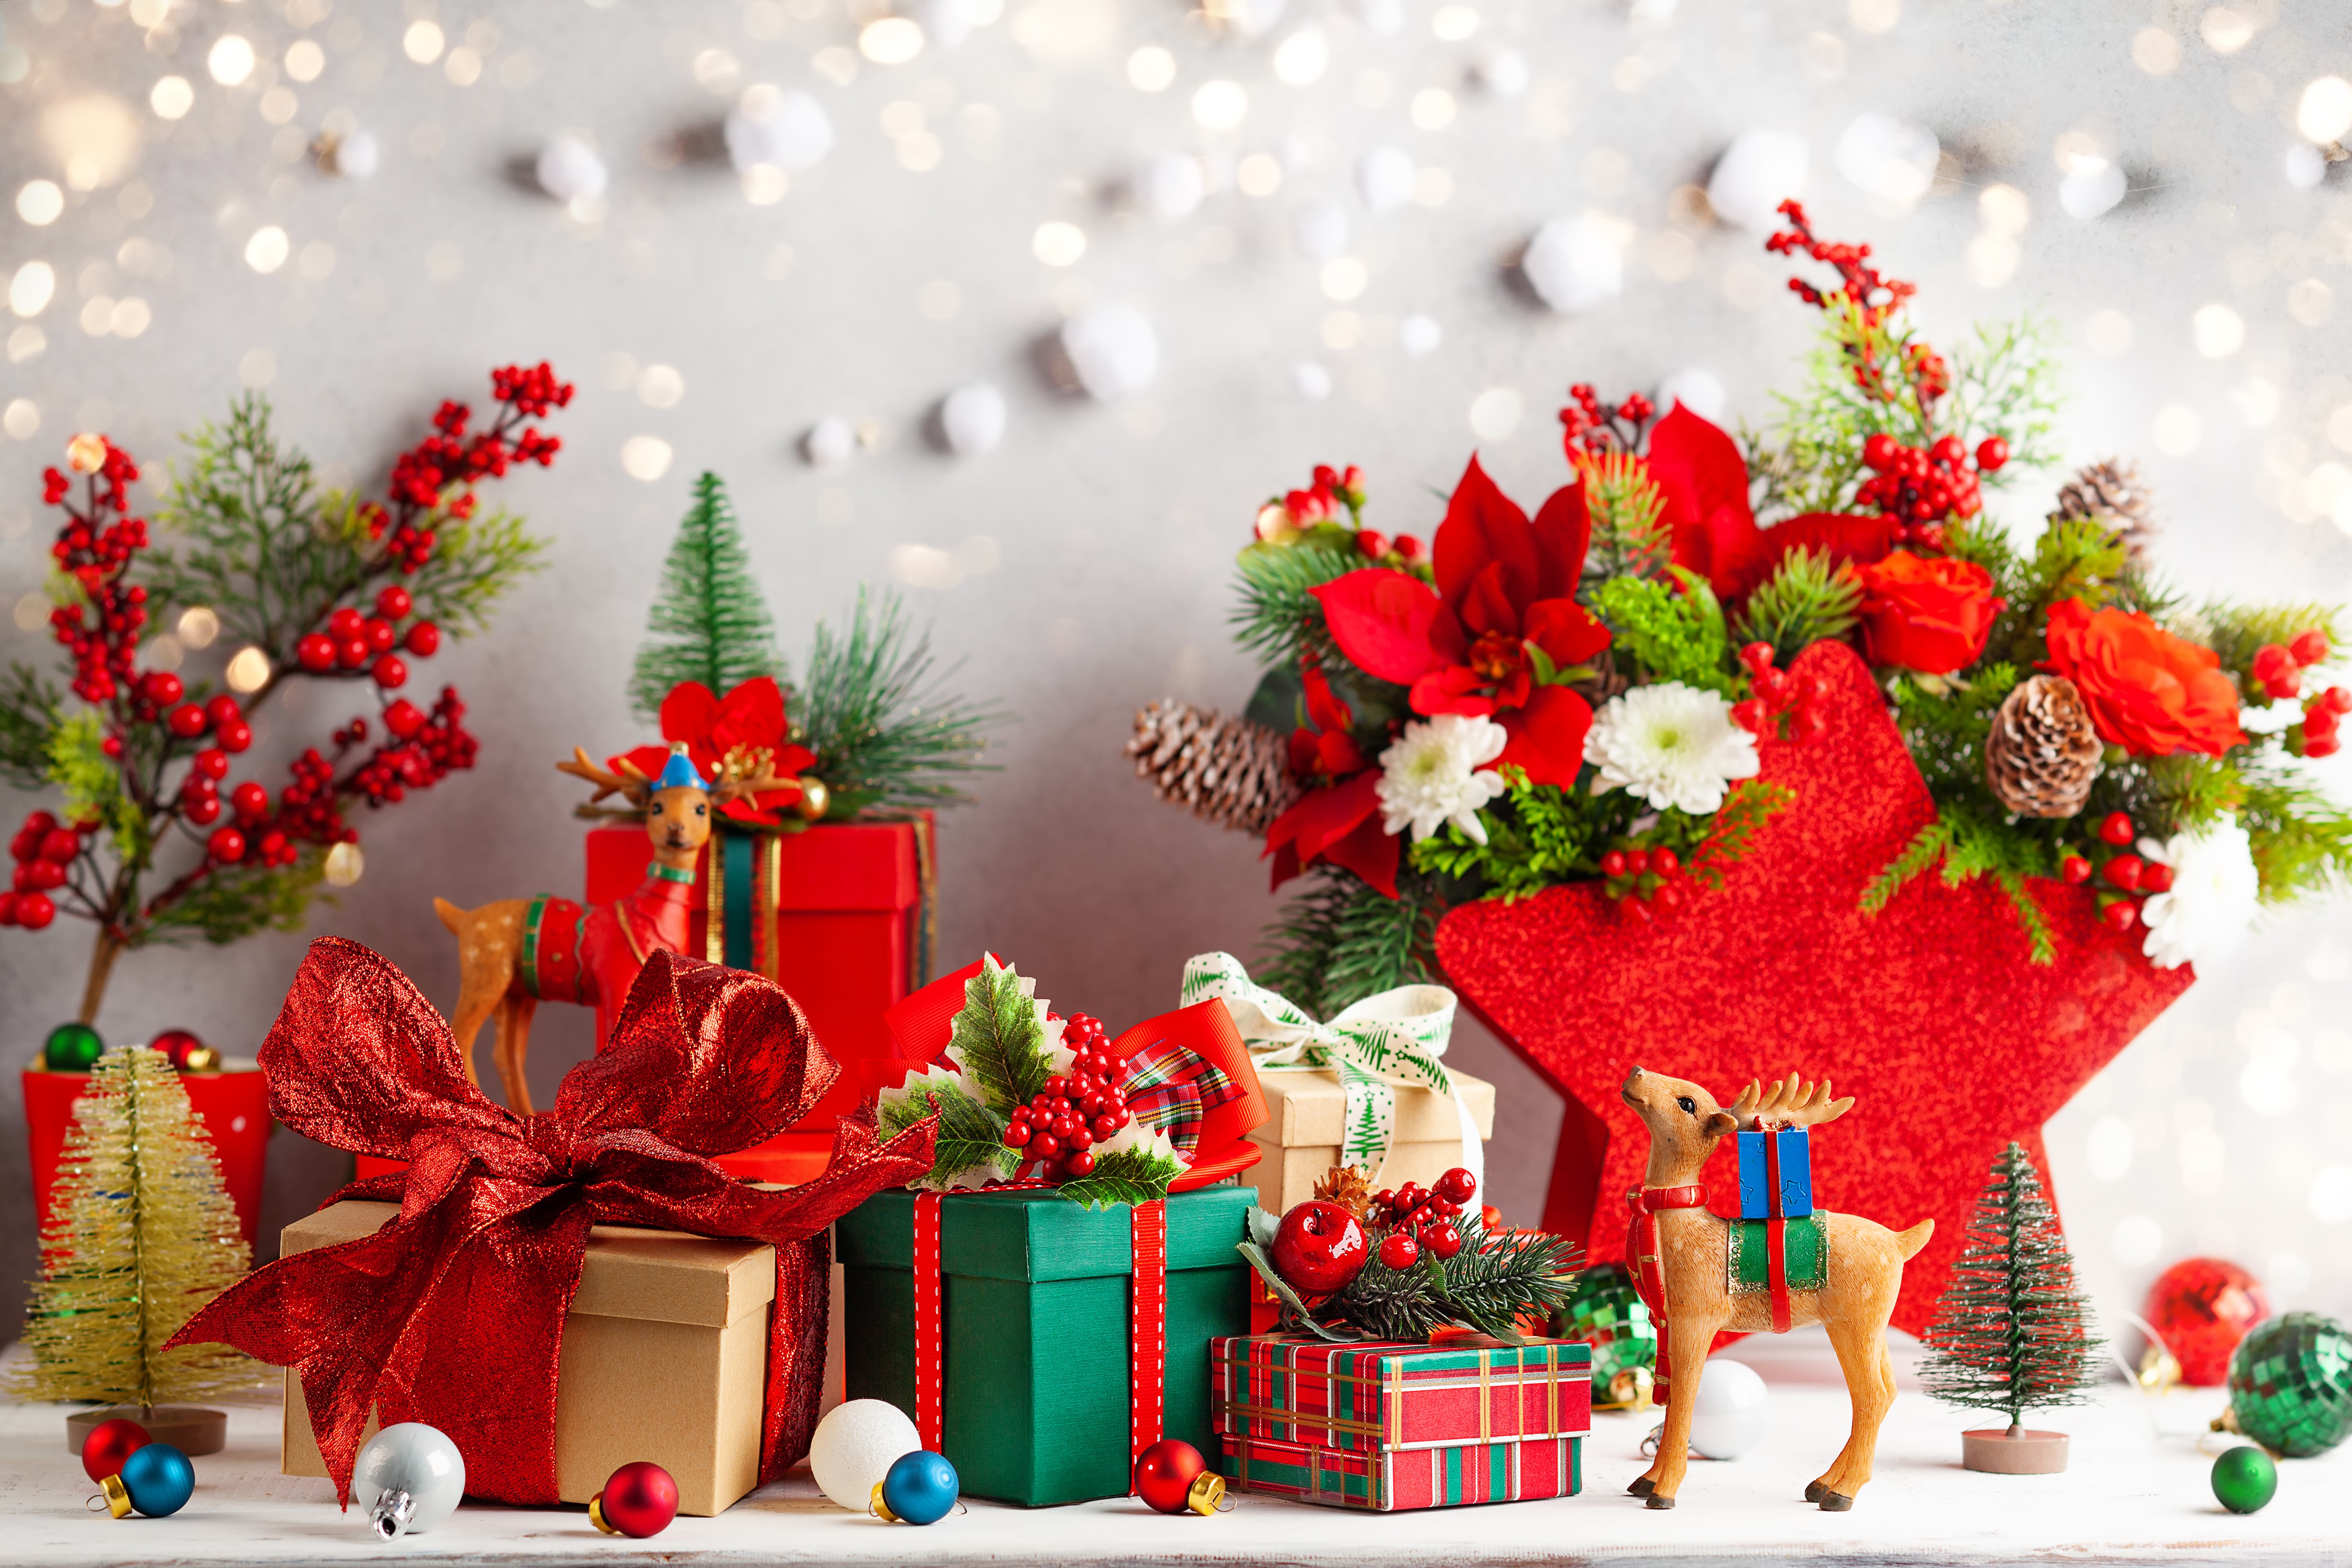 Best Christmas Flowers for Decorating Your Home